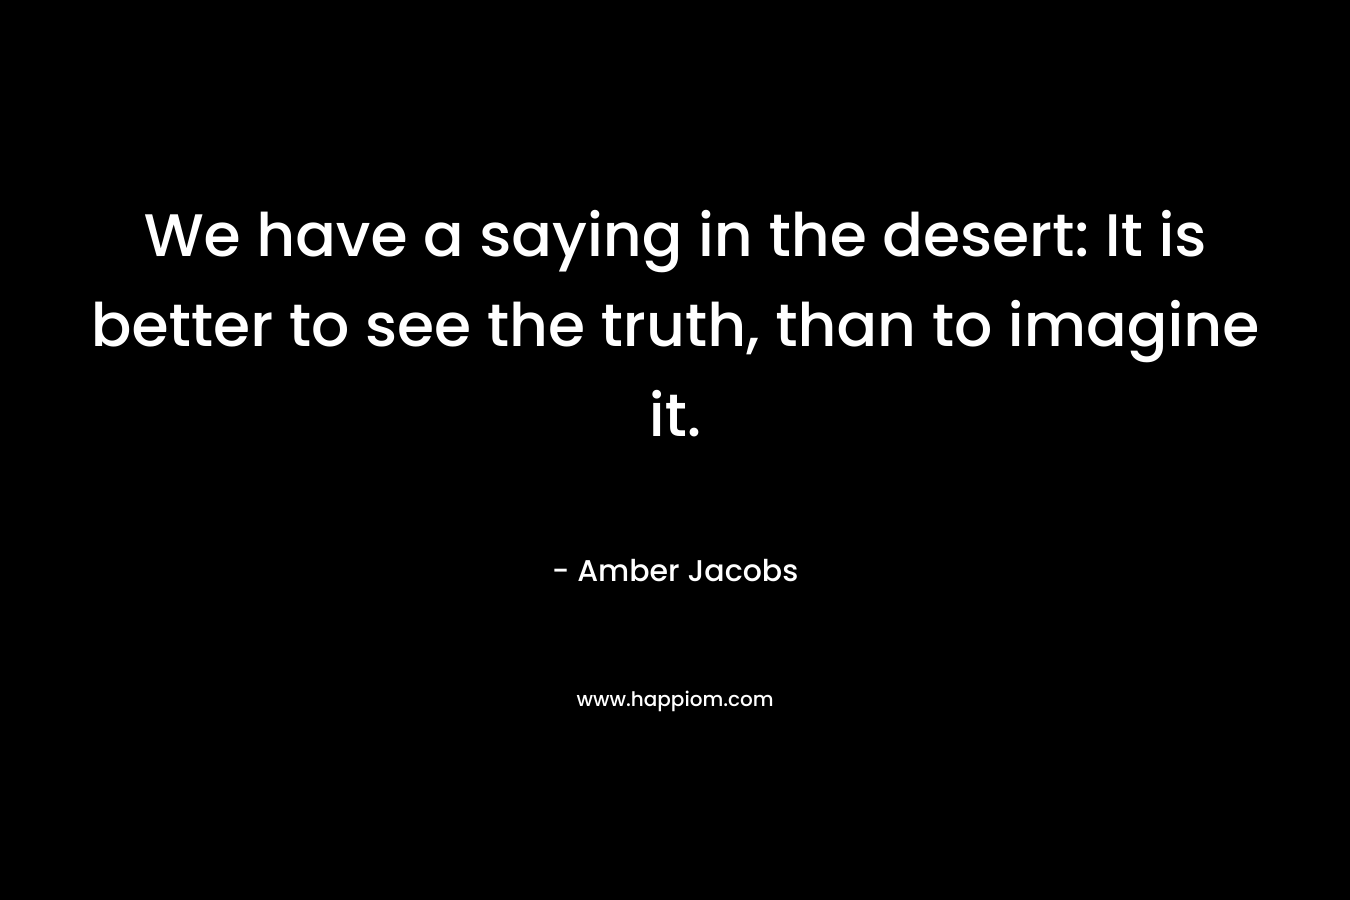 We have a saying in the desert: It is better to see the truth, than to imagine it.